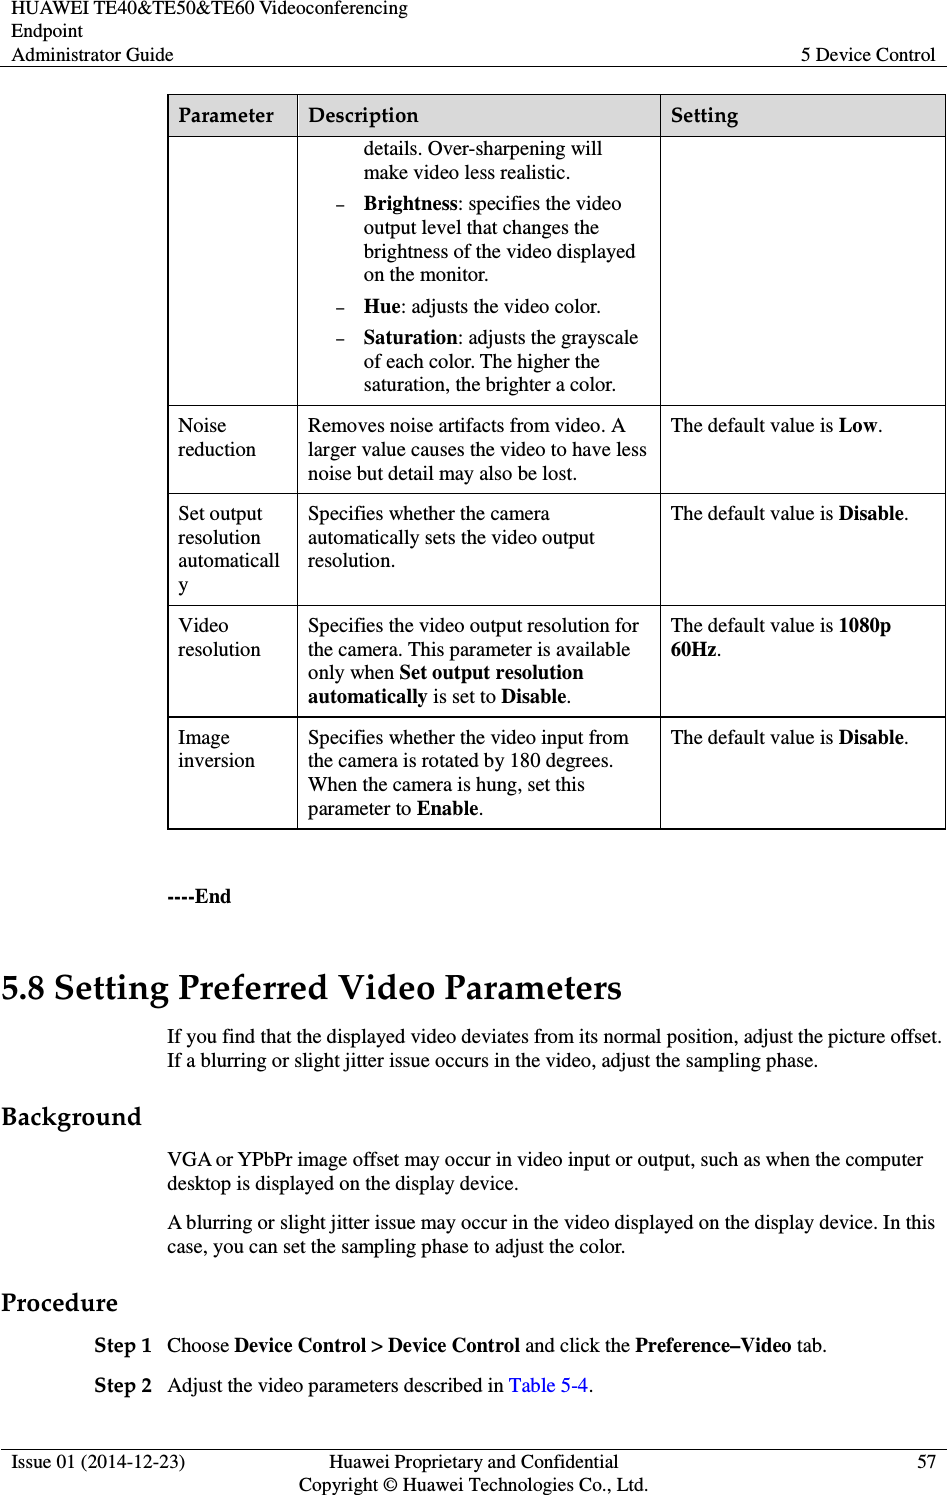 HUAWEI TE40&amp;TE50&amp;TE60 Videoconferencing Endpoint Administrator Guide  5 Device Control  Issue 01 (2014-12-23)  Huawei Proprietary and Confidential                                     Copyright © Huawei Technologies Co., Ltd. 57  Parameter  Description  Setting details. Over-sharpening will make video less realistic. − Brightness: specifies the video output level that changes the brightness of the video displayed on the monitor. − Hue: adjusts the video color.   − Saturation: adjusts the grayscale of each color. The higher the saturation, the brighter a color. Noise reduction Removes noise artifacts from video. A larger value causes the video to have less noise but detail may also be lost. The default value is Low. Set output resolution automatically Specifies whether the camera automatically sets the video output resolution. The default value is Disable. Video resolution Specifies the video output resolution for the camera. This parameter is available only when Set output resolution automatically is set to Disable. The default value is 1080p 60Hz. Image inversion Specifies whether the video input from the camera is rotated by 180 degrees. When the camera is hung, set this parameter to Enable. The default value is Disable.    ----End 5.8 Setting Preferred Video Parameters If you find that the displayed video deviates from its normal position, adjust the picture offset. If a blurring or slight jitter issue occurs in the video, adjust the sampling phase. Background VGA or YPbPr image offset may occur in video input or output, such as when the computer desktop is displayed on the display device.   A blurring or slight jitter issue may occur in the video displayed on the display device. In this case, you can set the sampling phase to adjust the color. Procedure Step 1 Choose Device Control &gt; Device Control and click the Preference–Video tab.   Step 2 Adjust the video parameters described in Table 5-4. 